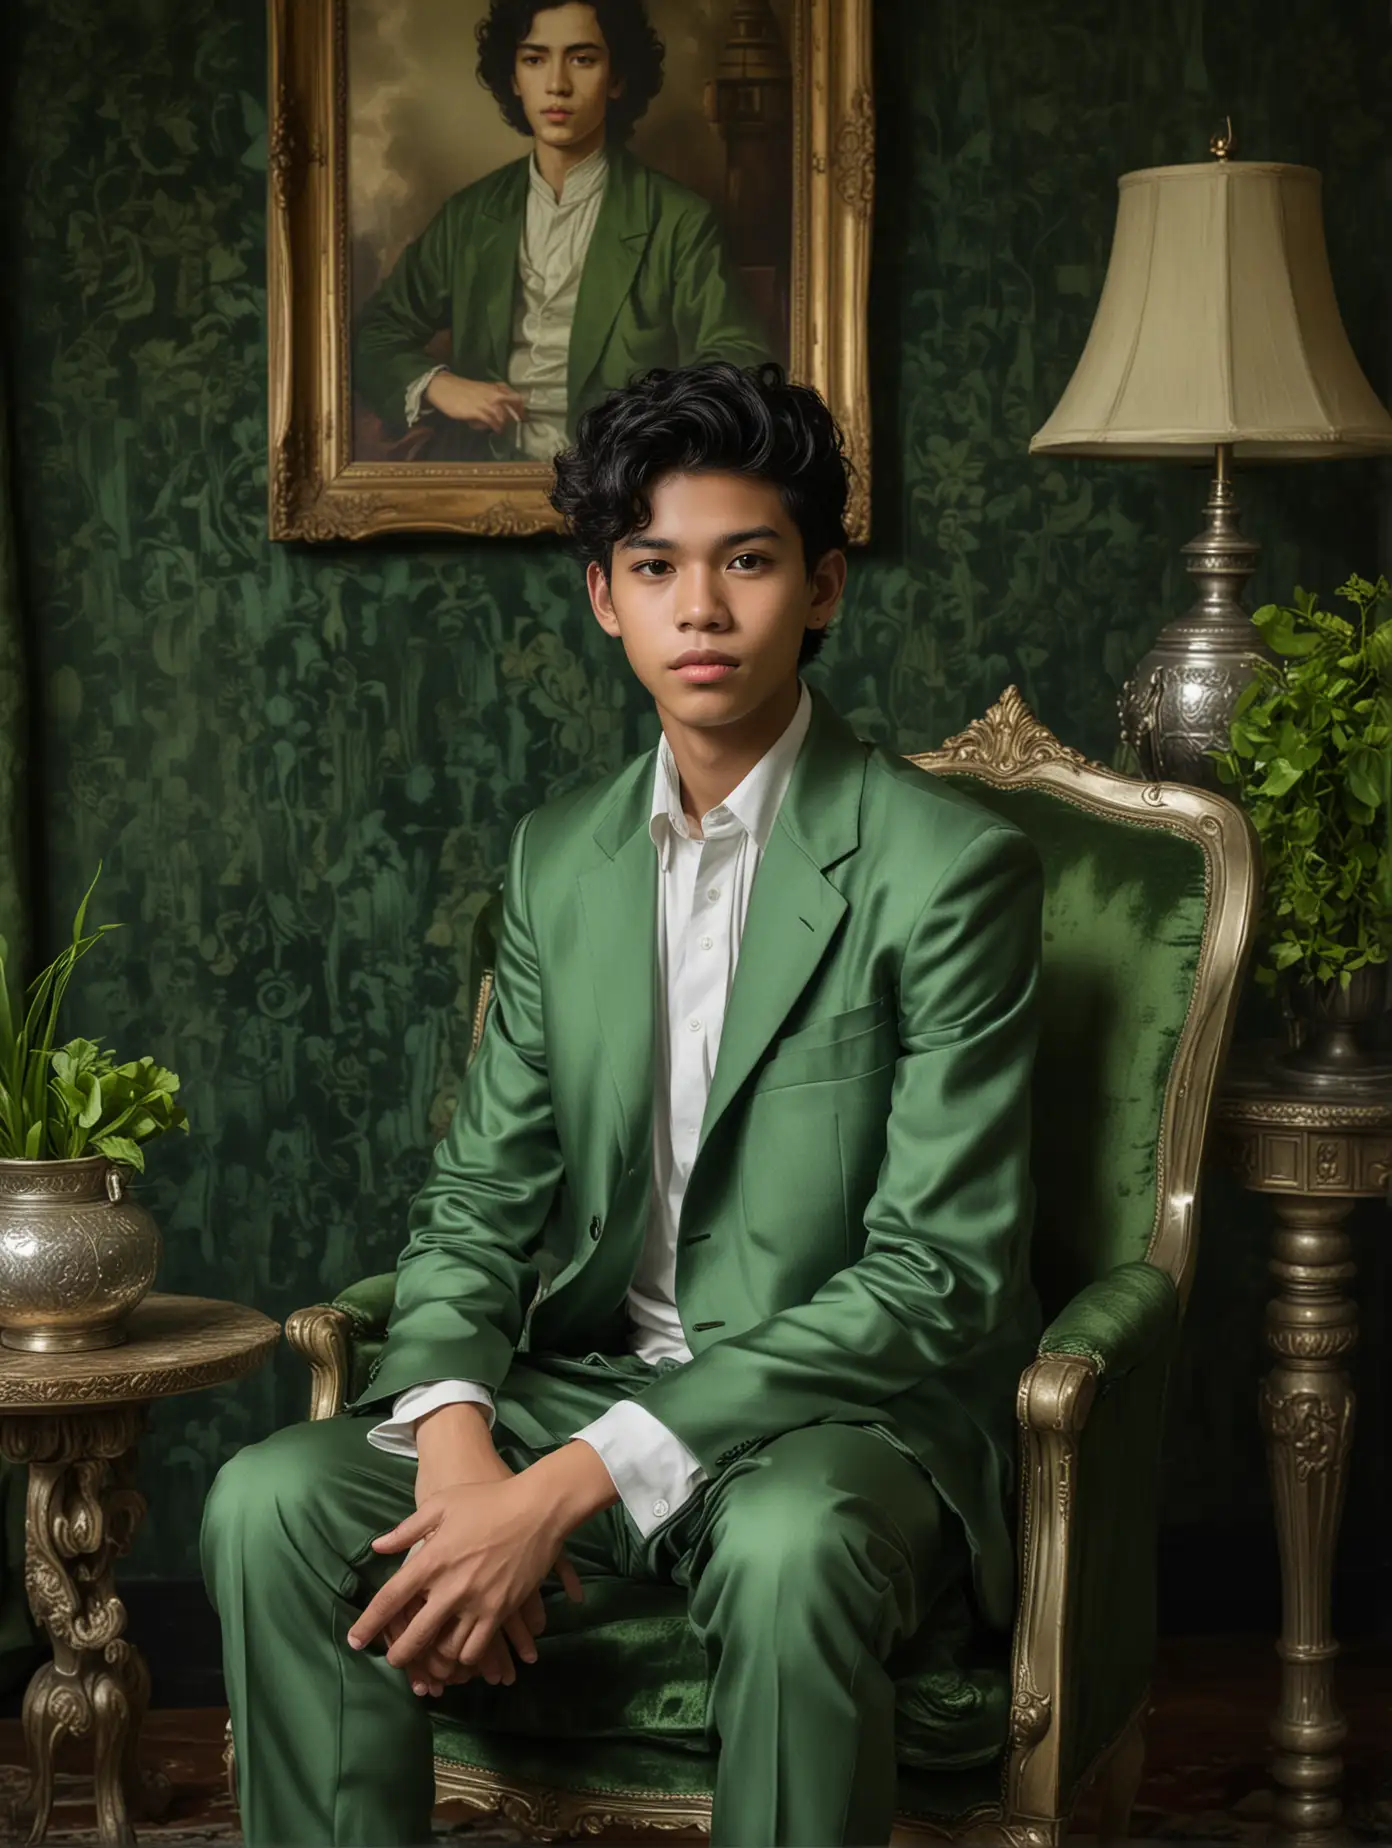 Handsome-16YearOld-Indonesian-Man-in-Green-Jacket-Sitting-in-Luxurious-Room